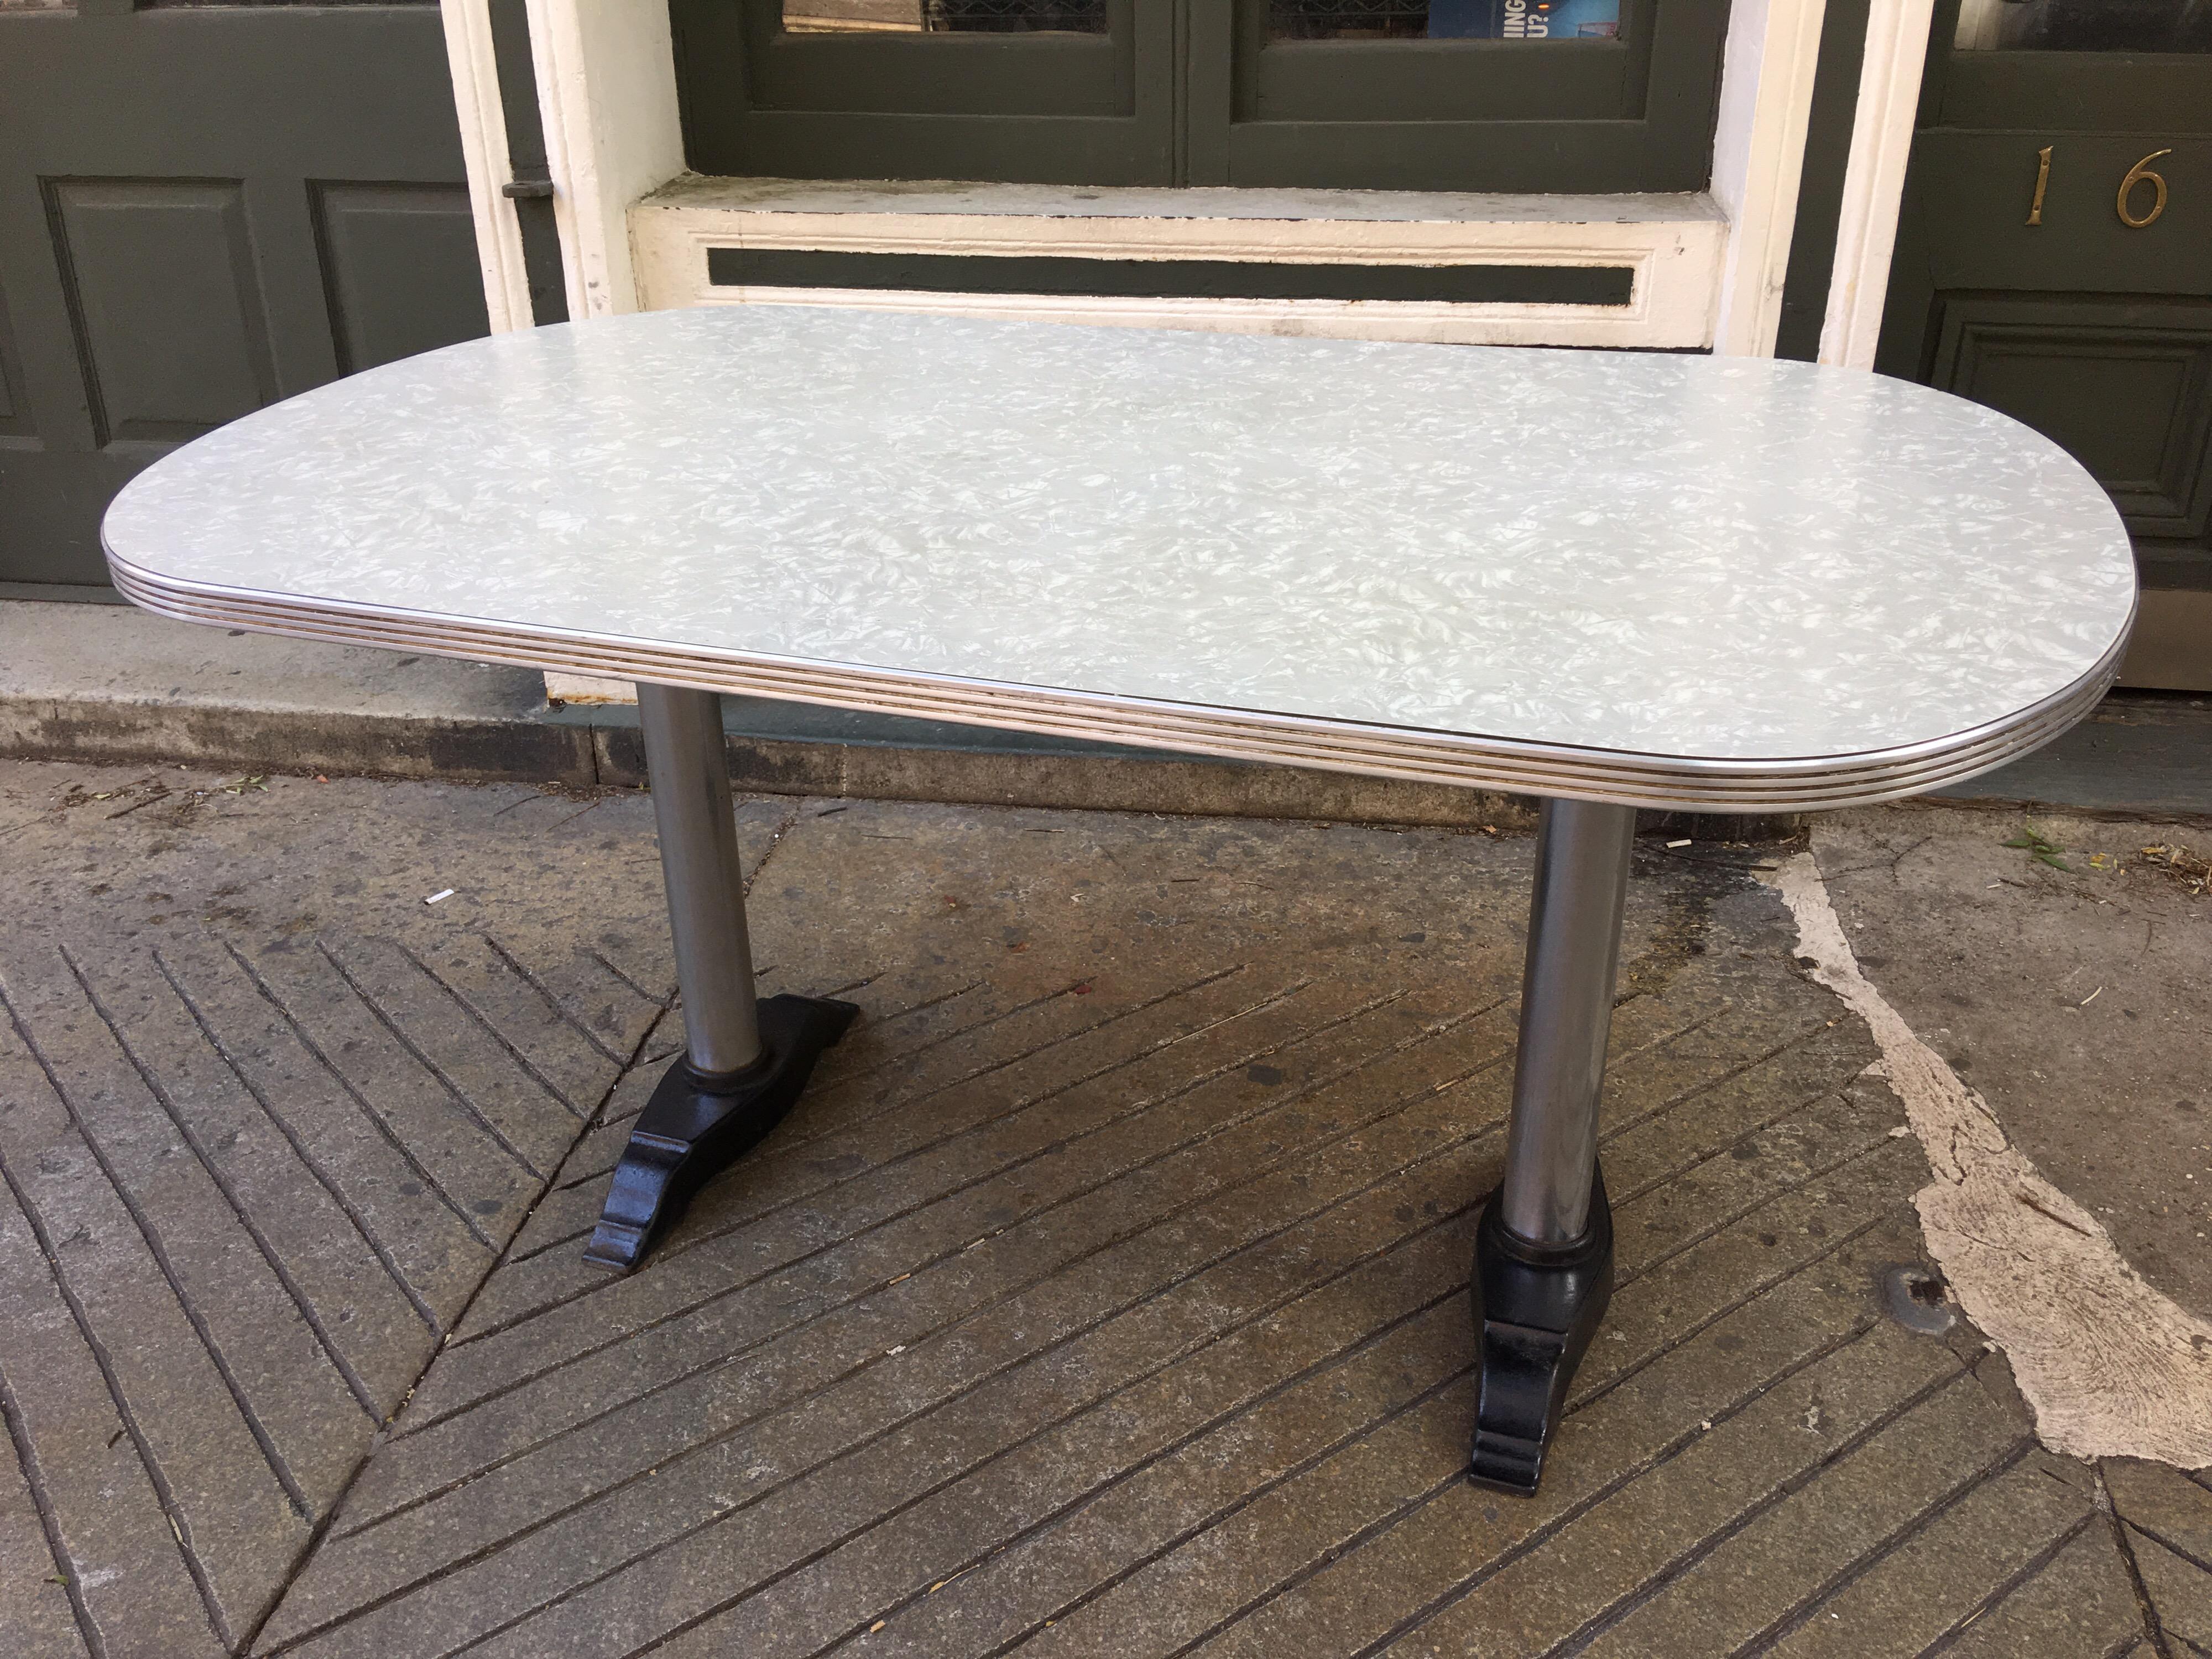 Great $0's or 50's Diner Table. 2 pedestal bases give this formica topped table style and stability! Formica in great shape! Aluminum edging with chrome poles and cast iron black feet are all classic Deco styling!